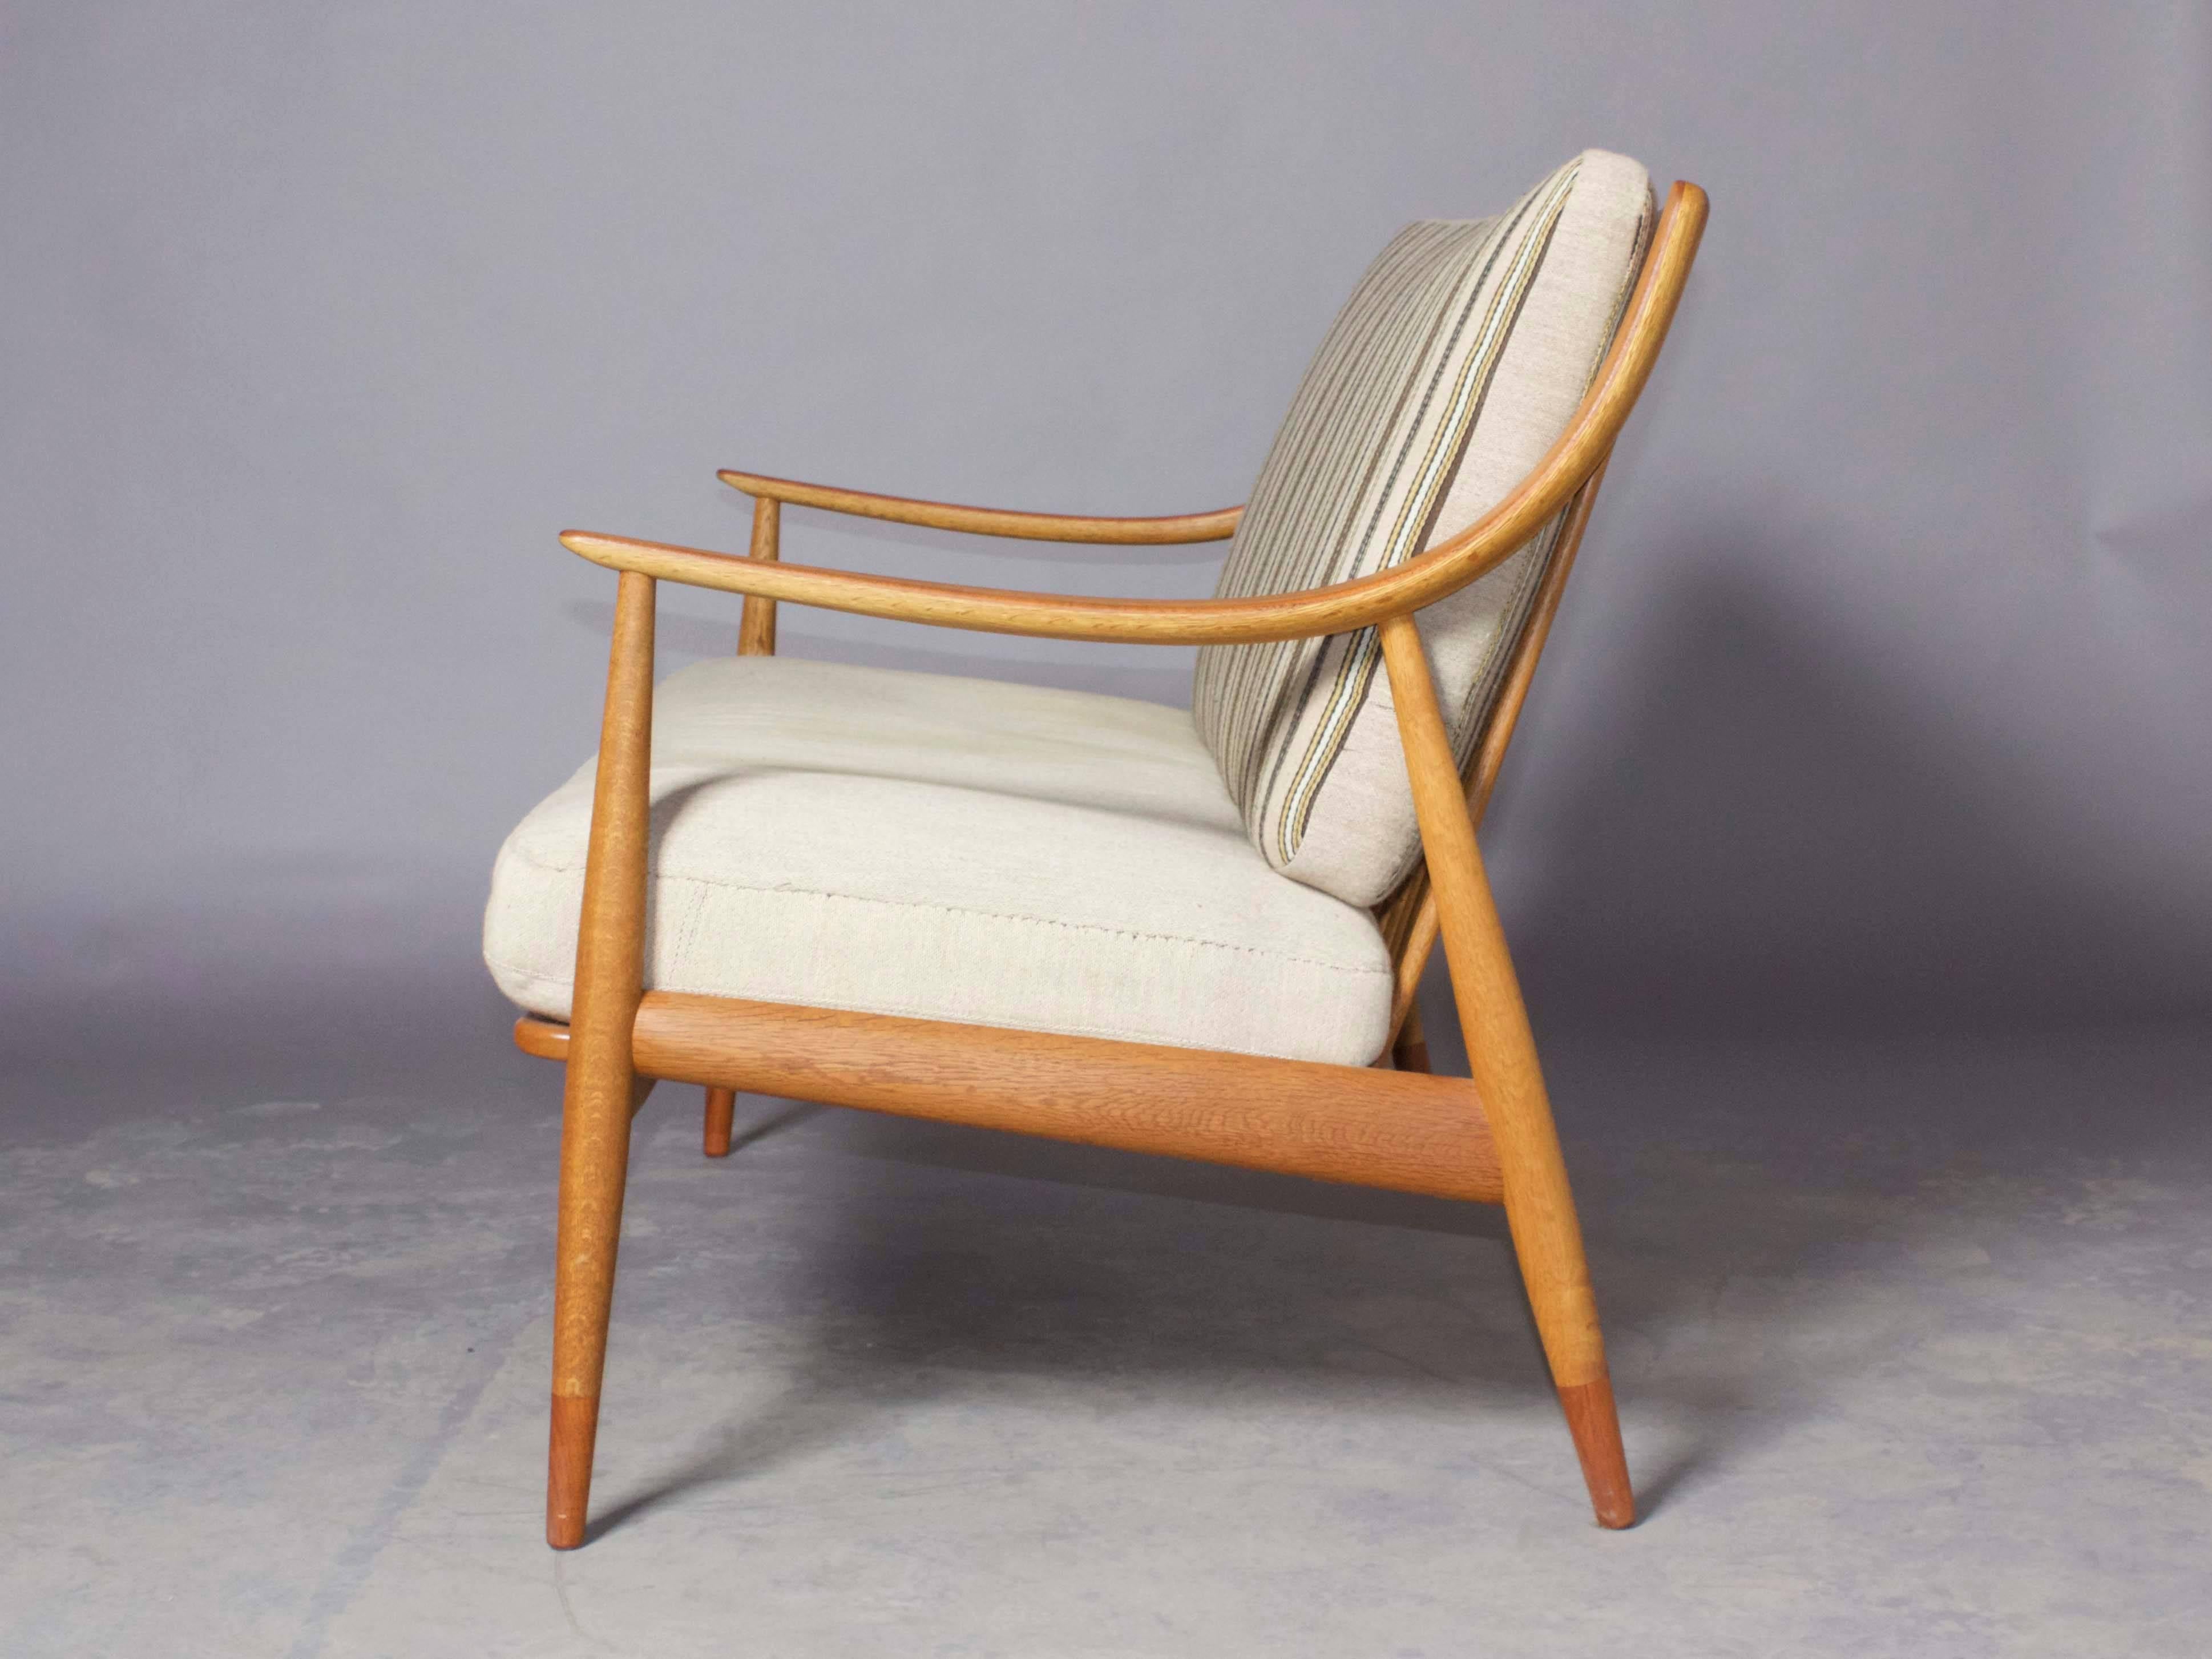 Danish Love Seat #147 by Hvidt and Molgaard for France & Sons